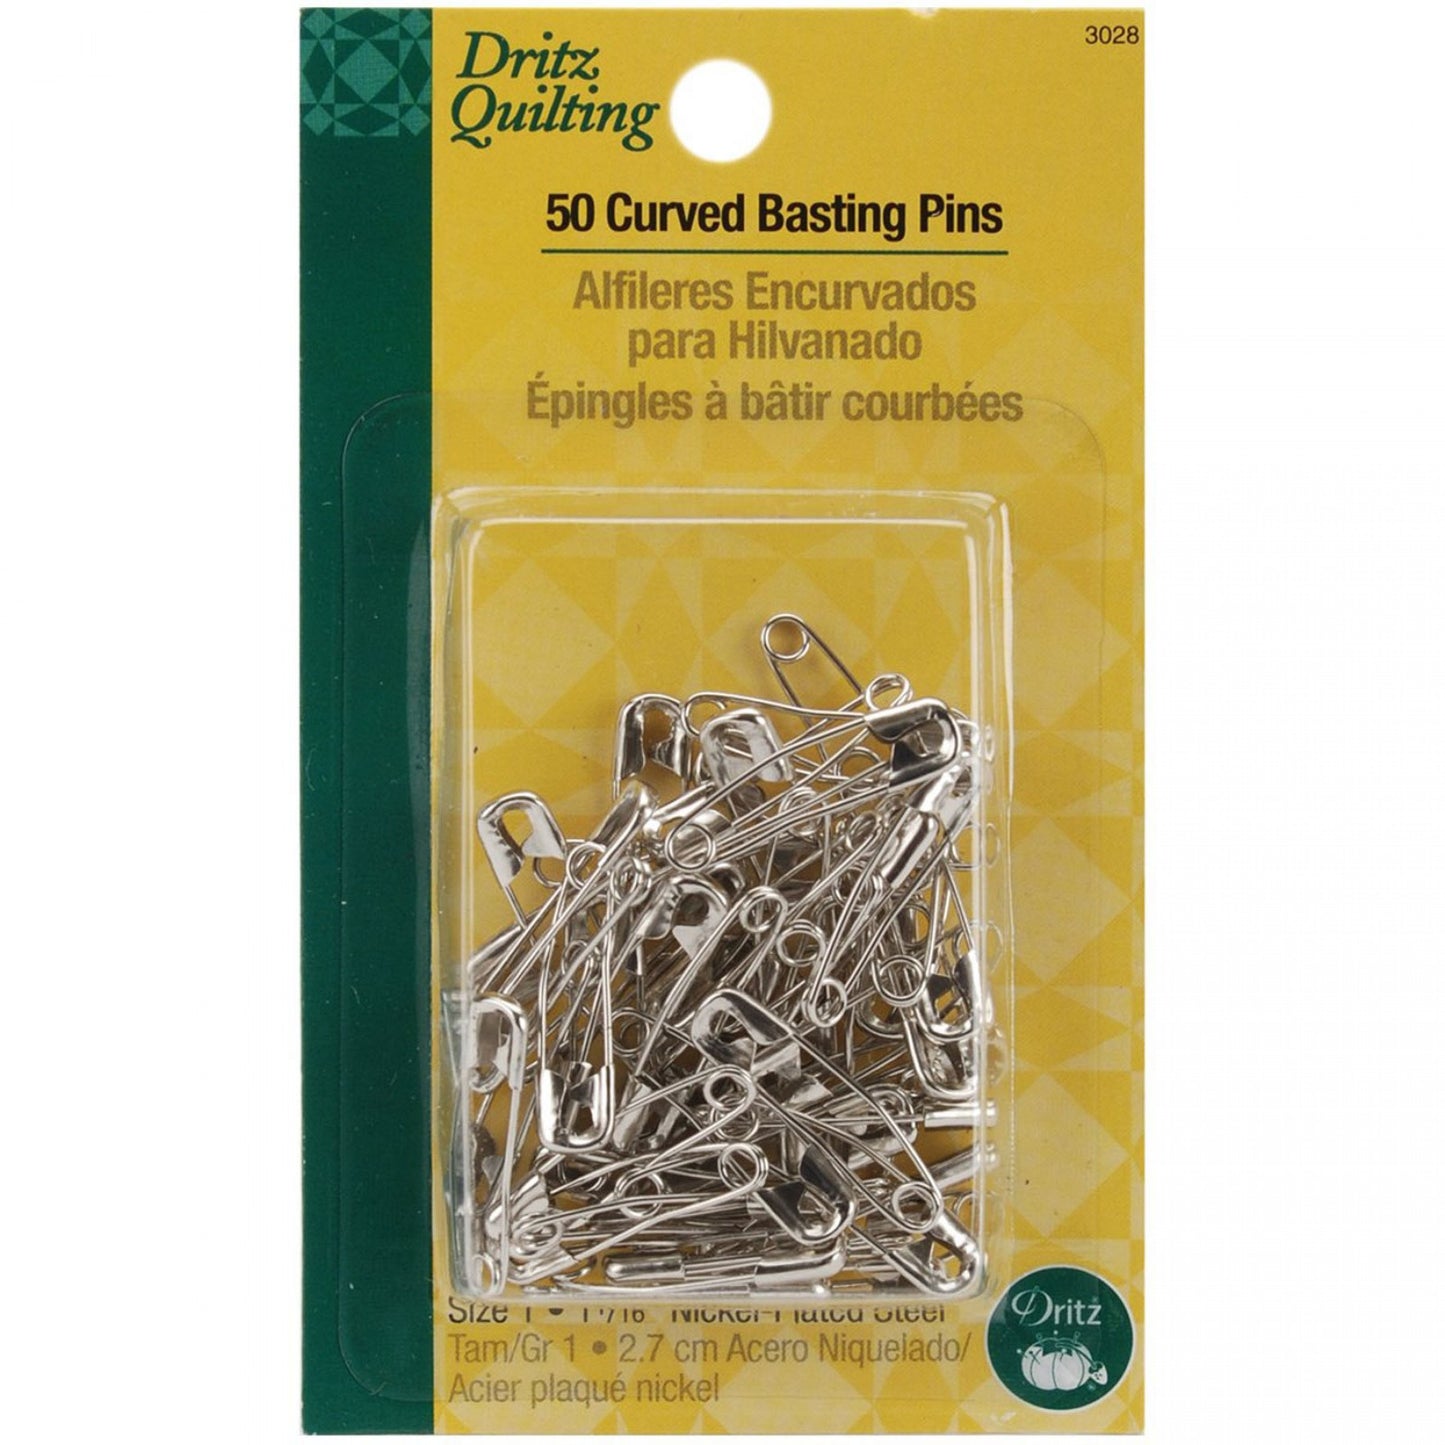 Dritz Curved Basting Pins